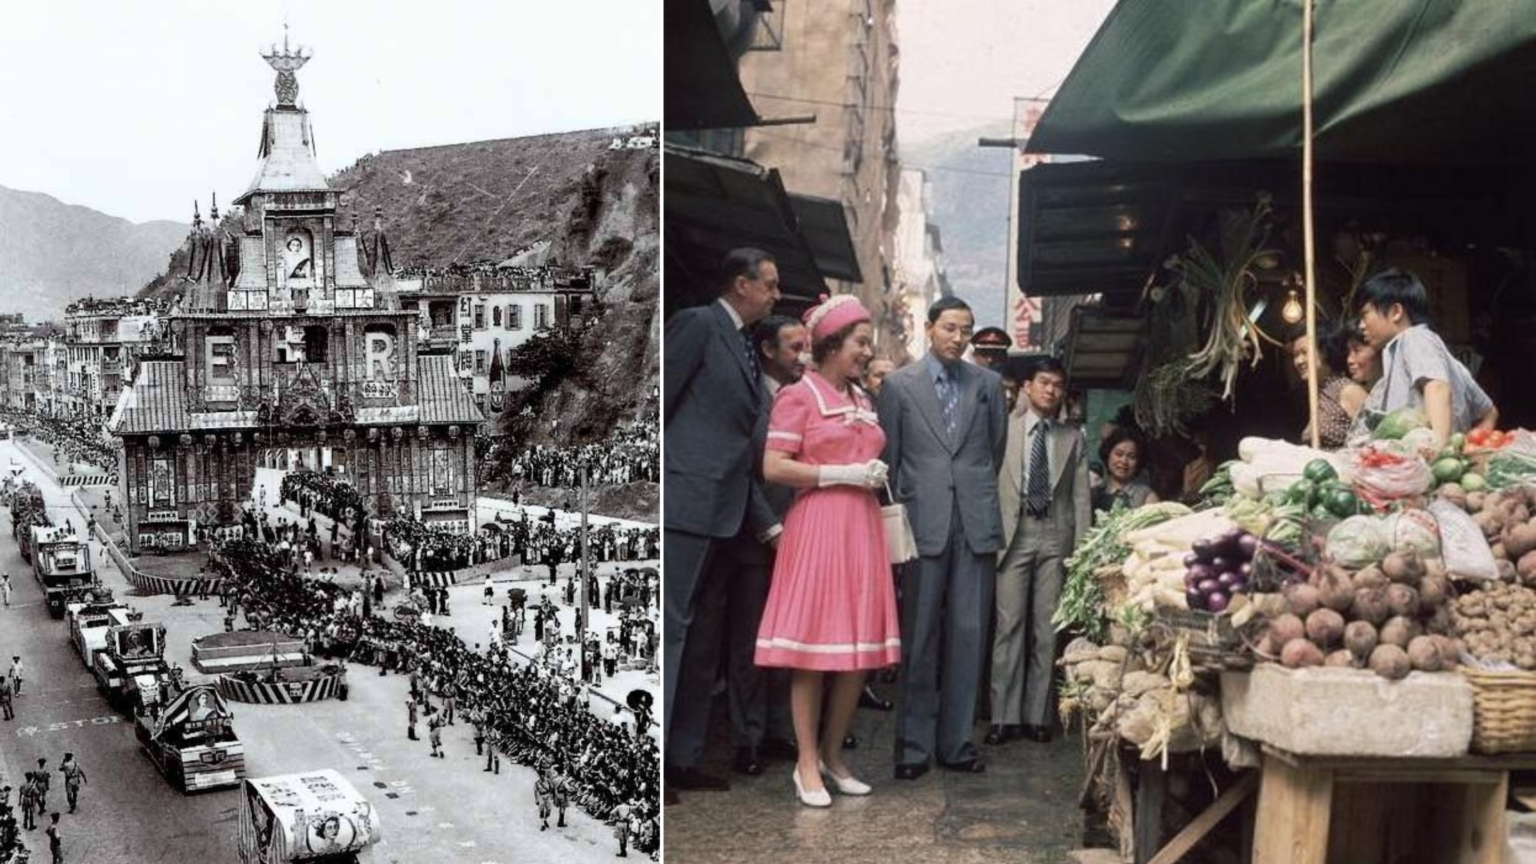 Queen Elizabeth II's coronation celebrations in Hong Kong, and the Queen visiting a market in the city in 1975.